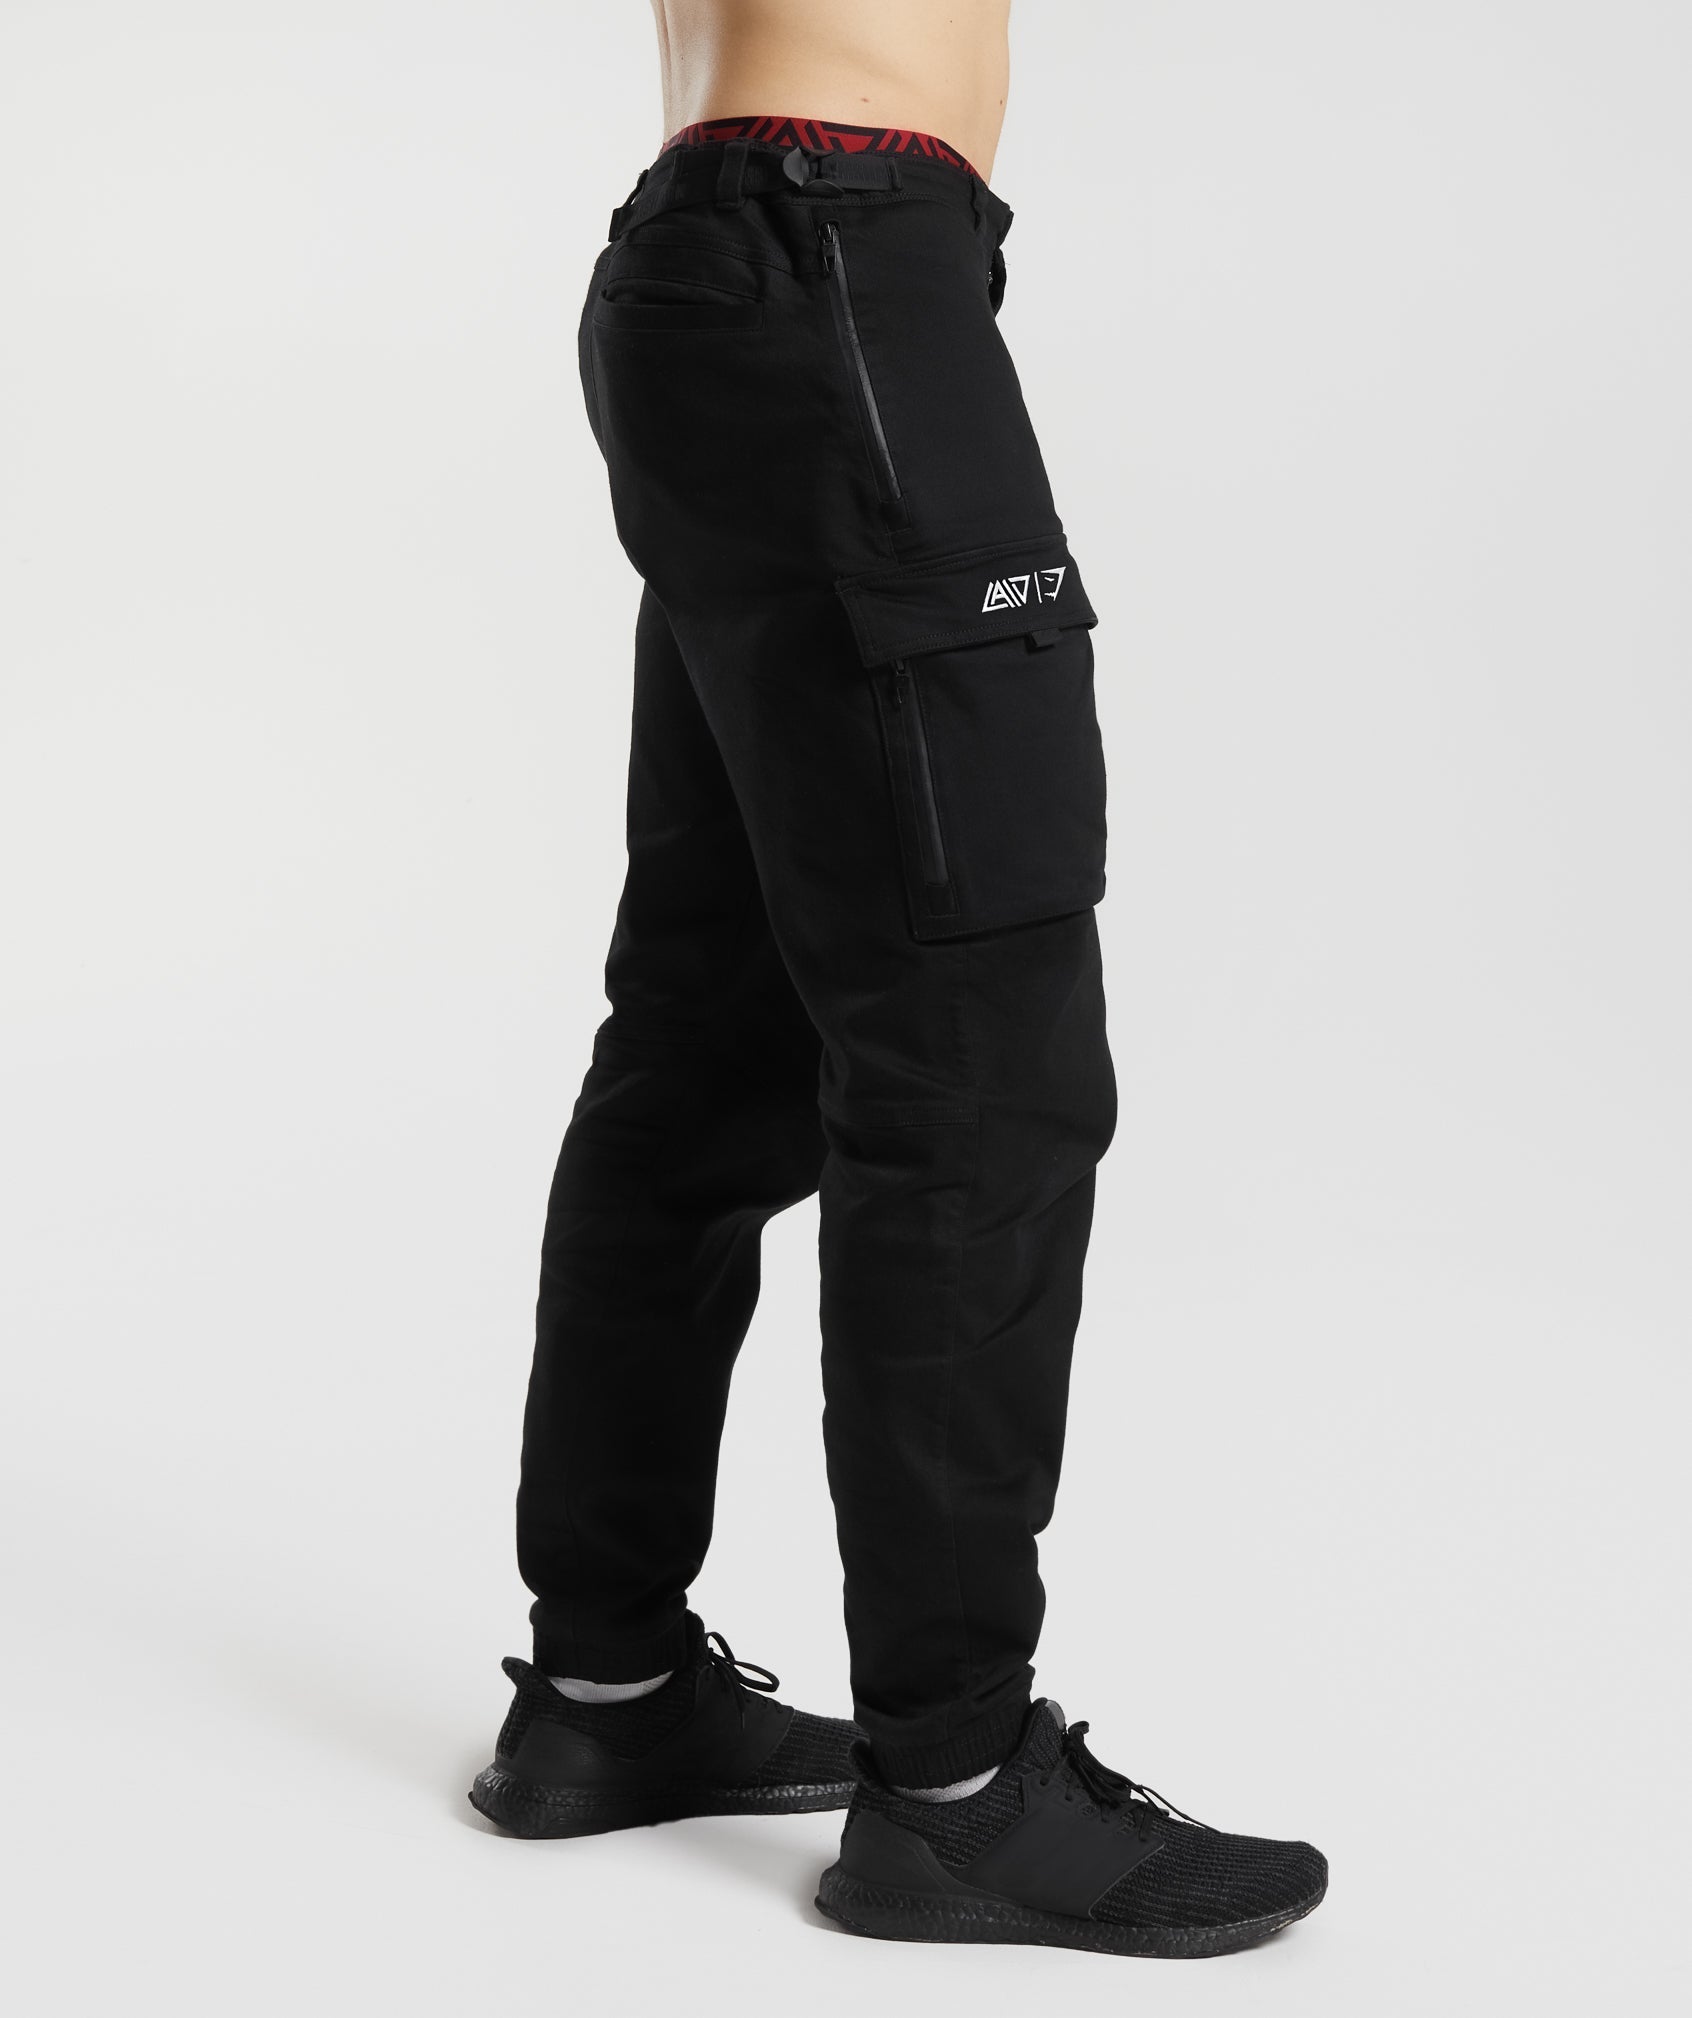 GS x David Laid Cargo Pants in Black - view 3